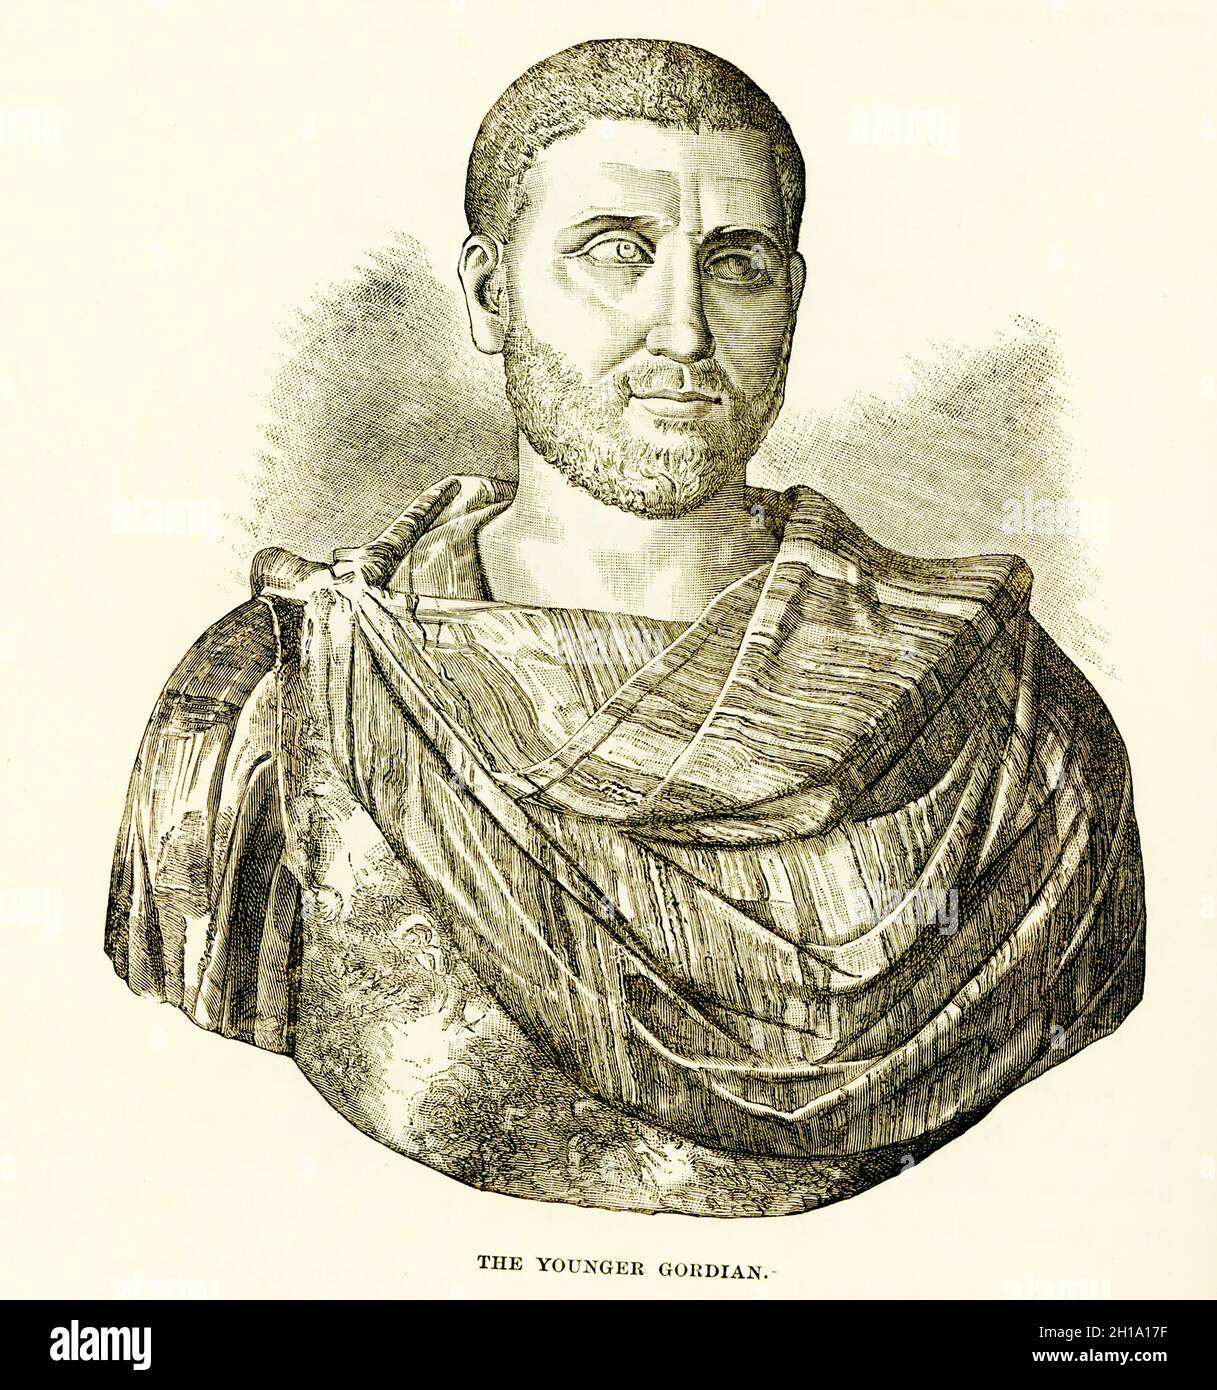 The 1884 caption for this illustration reads:  Younger Gordian -  bust of the Capitol Hall of the Emperors. Gordian III (born AD  225) was Roman emperor from 238 to 244. At the age of 13, he became the youngest sole Roman emperor. Gordian was the son of Antonia Gordiana and Junius Balbus who died before 238. Antonia Gordiana was the daughter of Emperor Gordian I and younger sister of Emperor Gordian II. Stock Photo